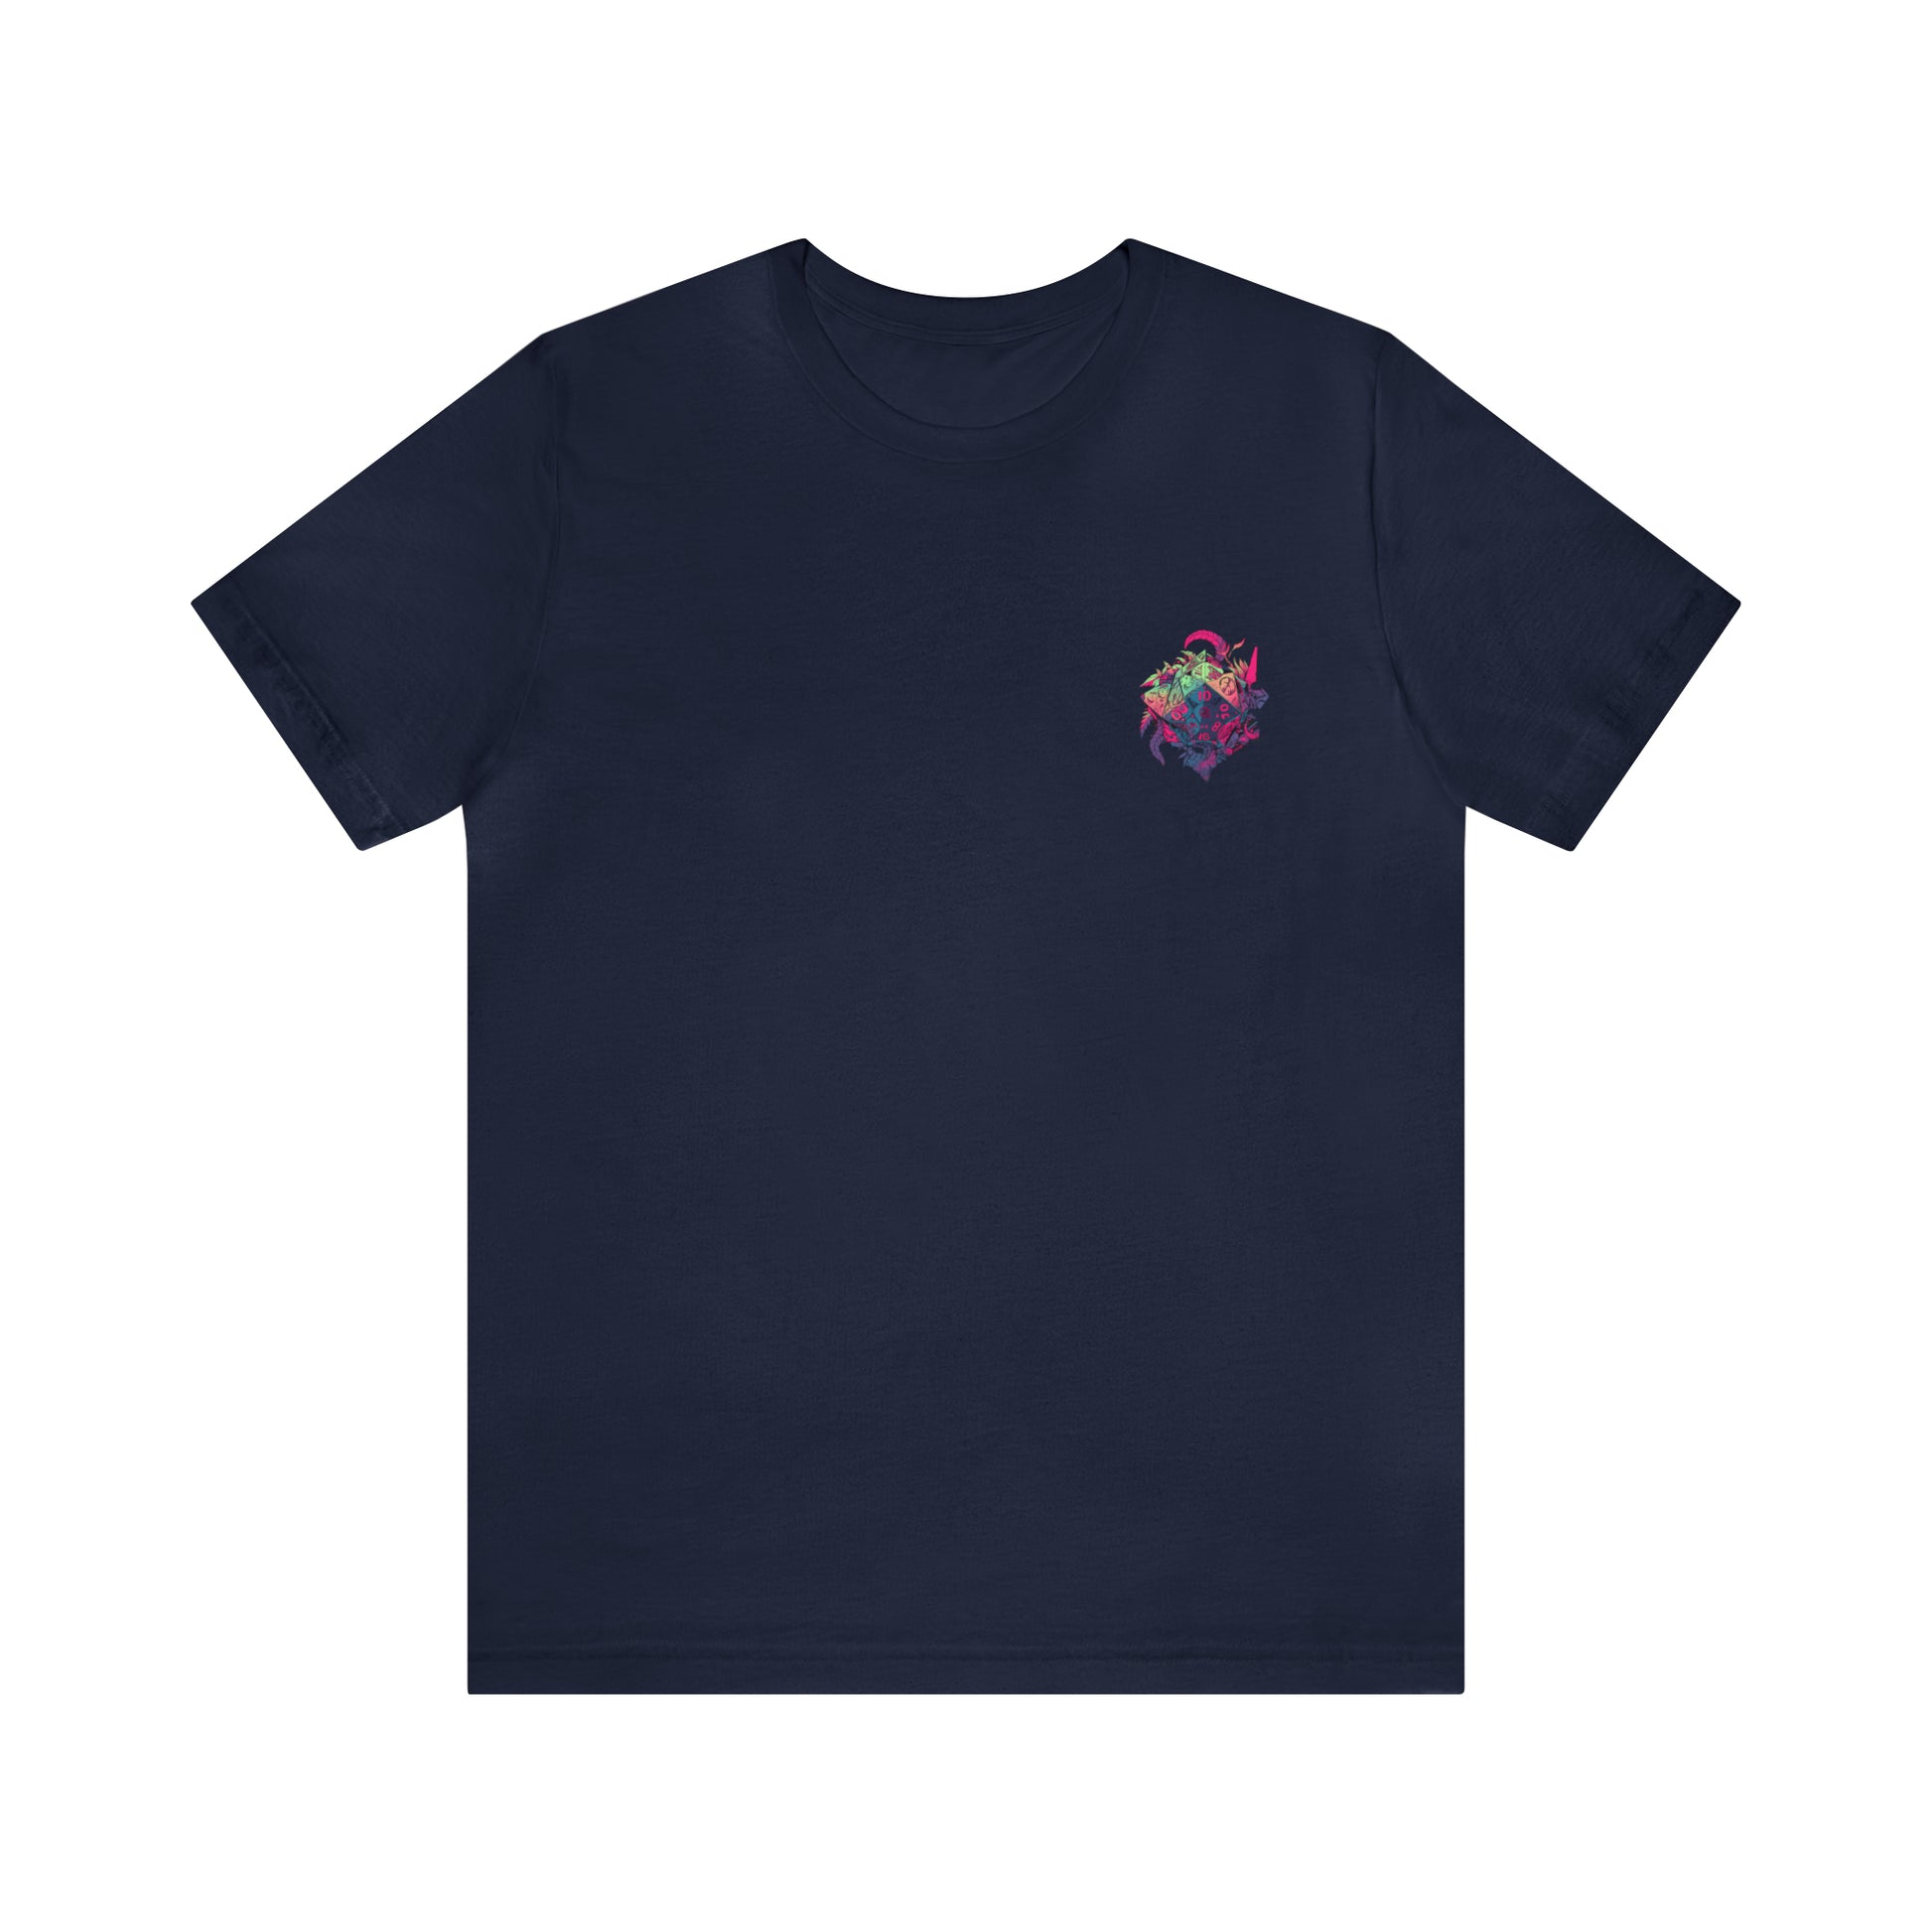 navy-quest-thread-tee-shirt-with-small-colorful-dice-in-pink-jungle-on-chest